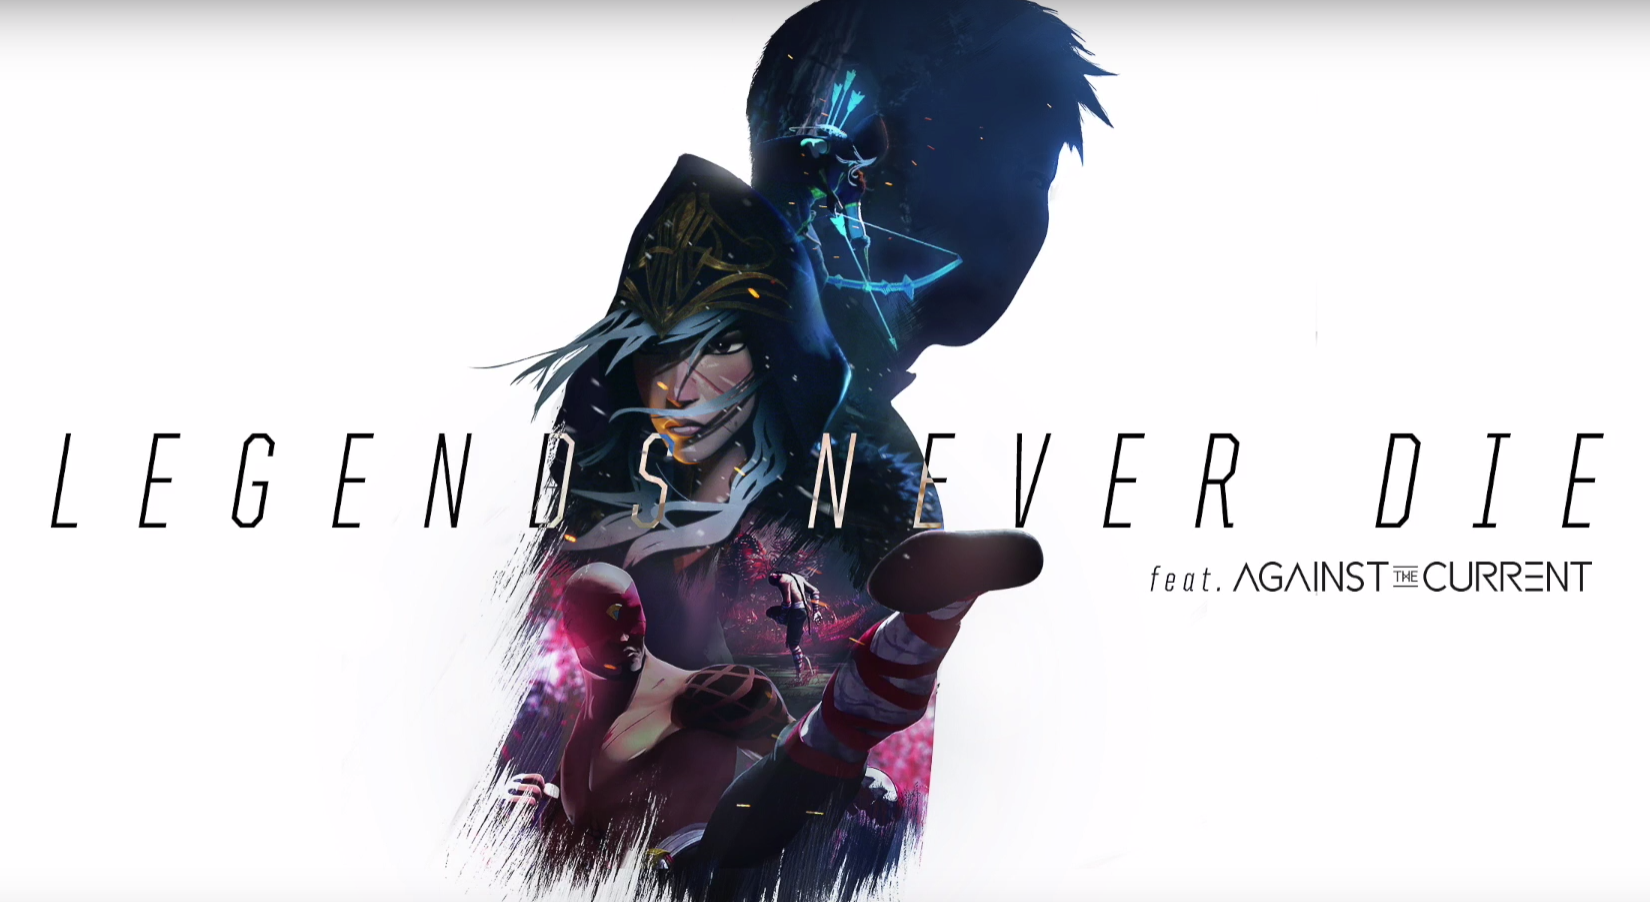 The 2017 Worlds theme song is here—”Legends Never Die” feat. Against the Current